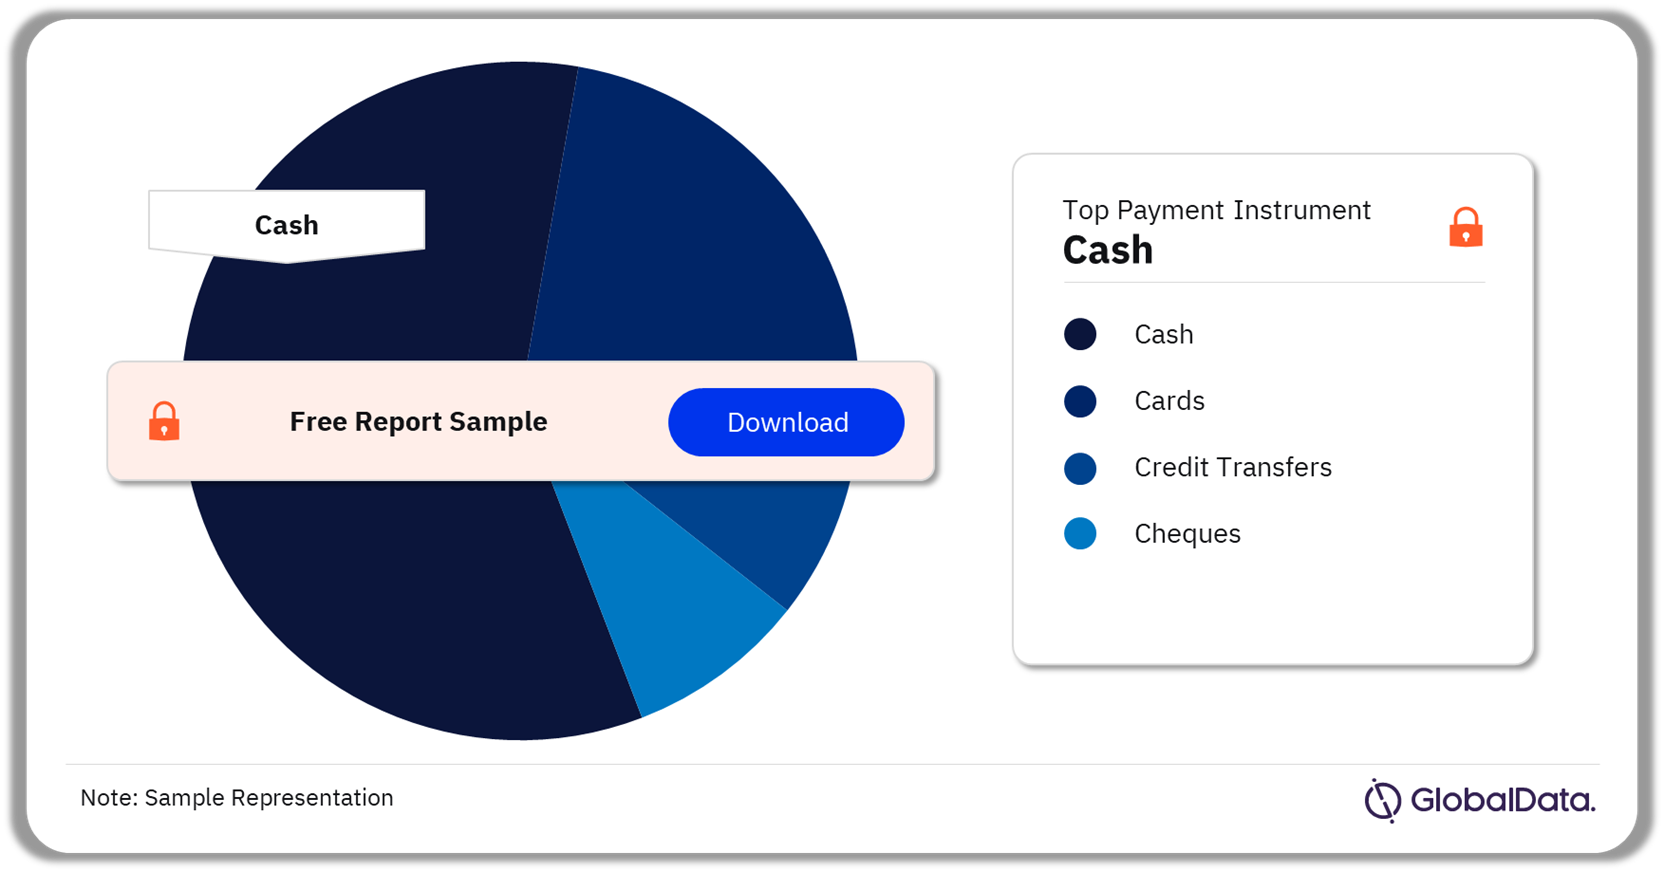 Japan Cards and Payments Market Analysis by Payment Instruments (Volume Terms), 2023 (%)